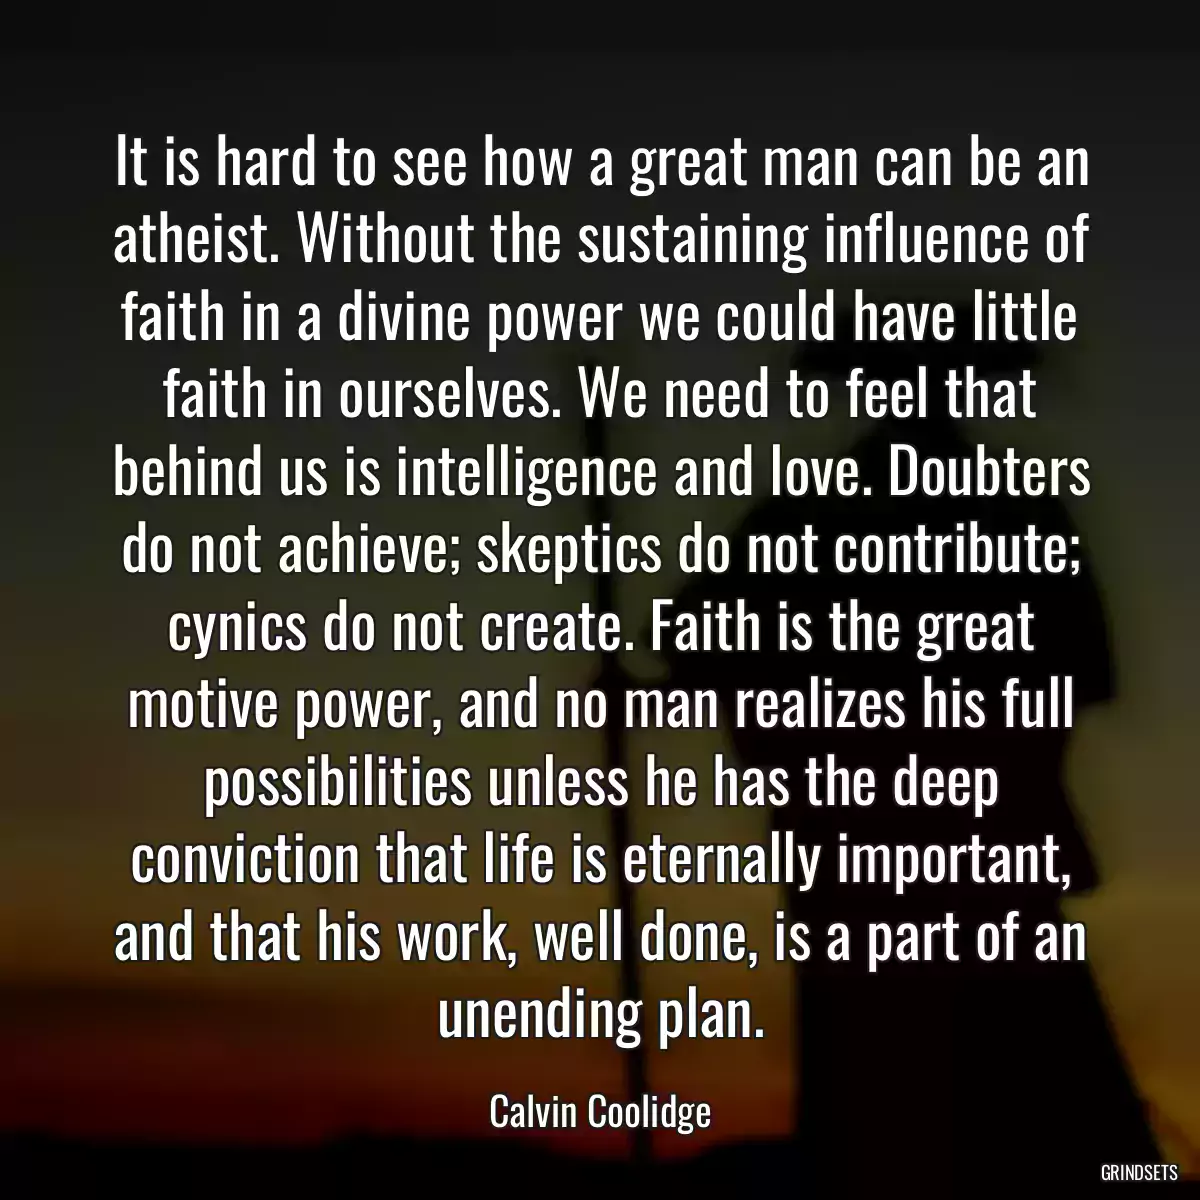 It is hard to see how a great man can be an atheist. Without the sustaining influence of faith in a divine power we could have little faith in ourselves. We need to feel that behind us is intelligence and love. Doubters do not achieve; skeptics do not contribute; cynics do not create. Faith is the great motive power, and no man realizes his full possibilities unless he has the deep conviction that life is eternally important, and that his work, well done, is a part of an unending plan.